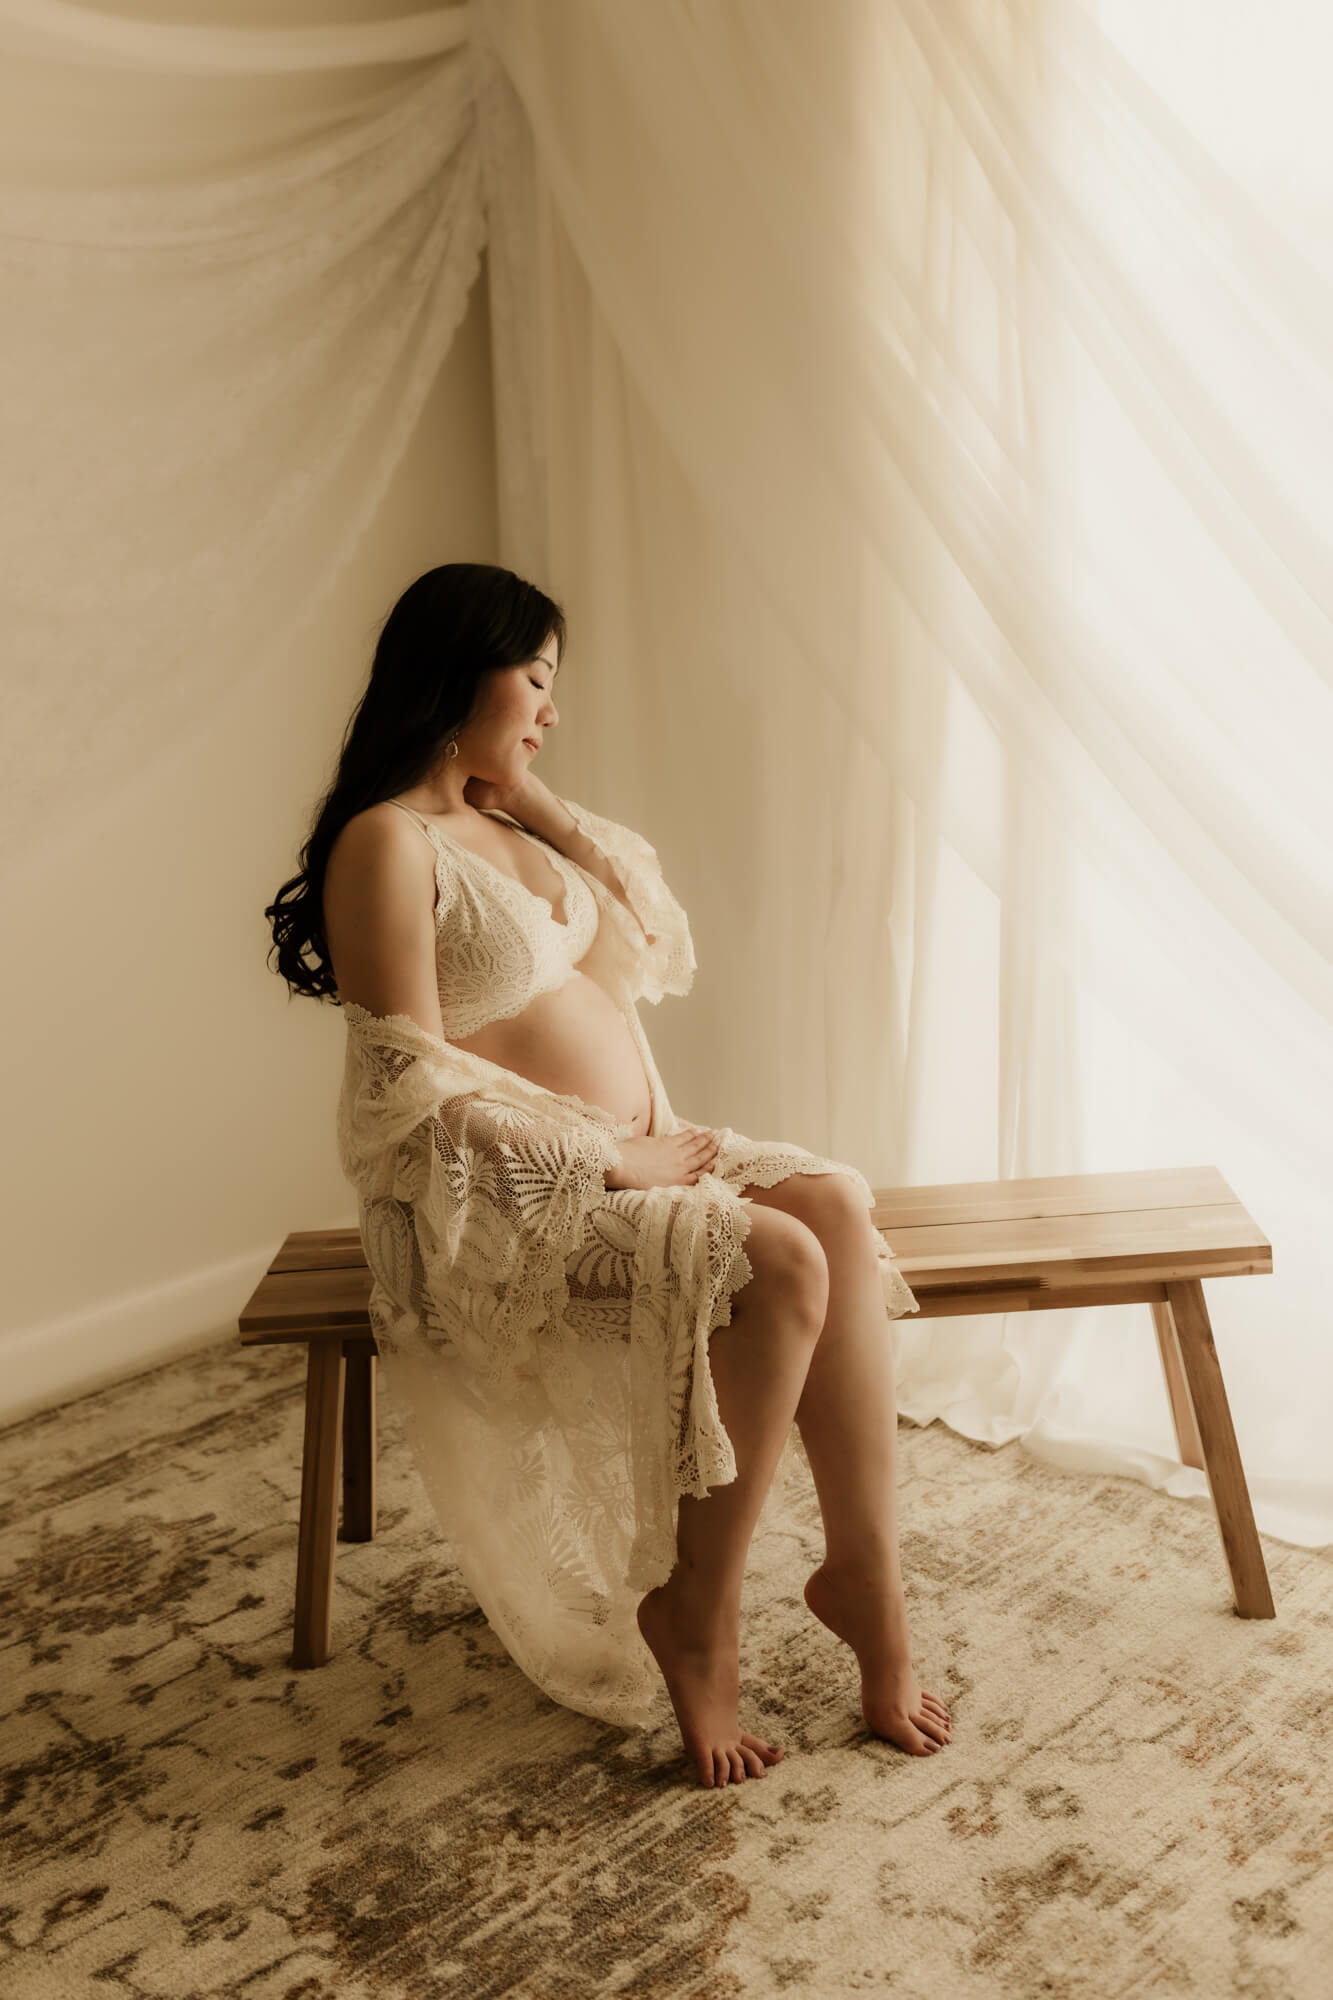 Pregnant mother posed for a maternity portrait while sitting on a bench, prenatal massage okc.